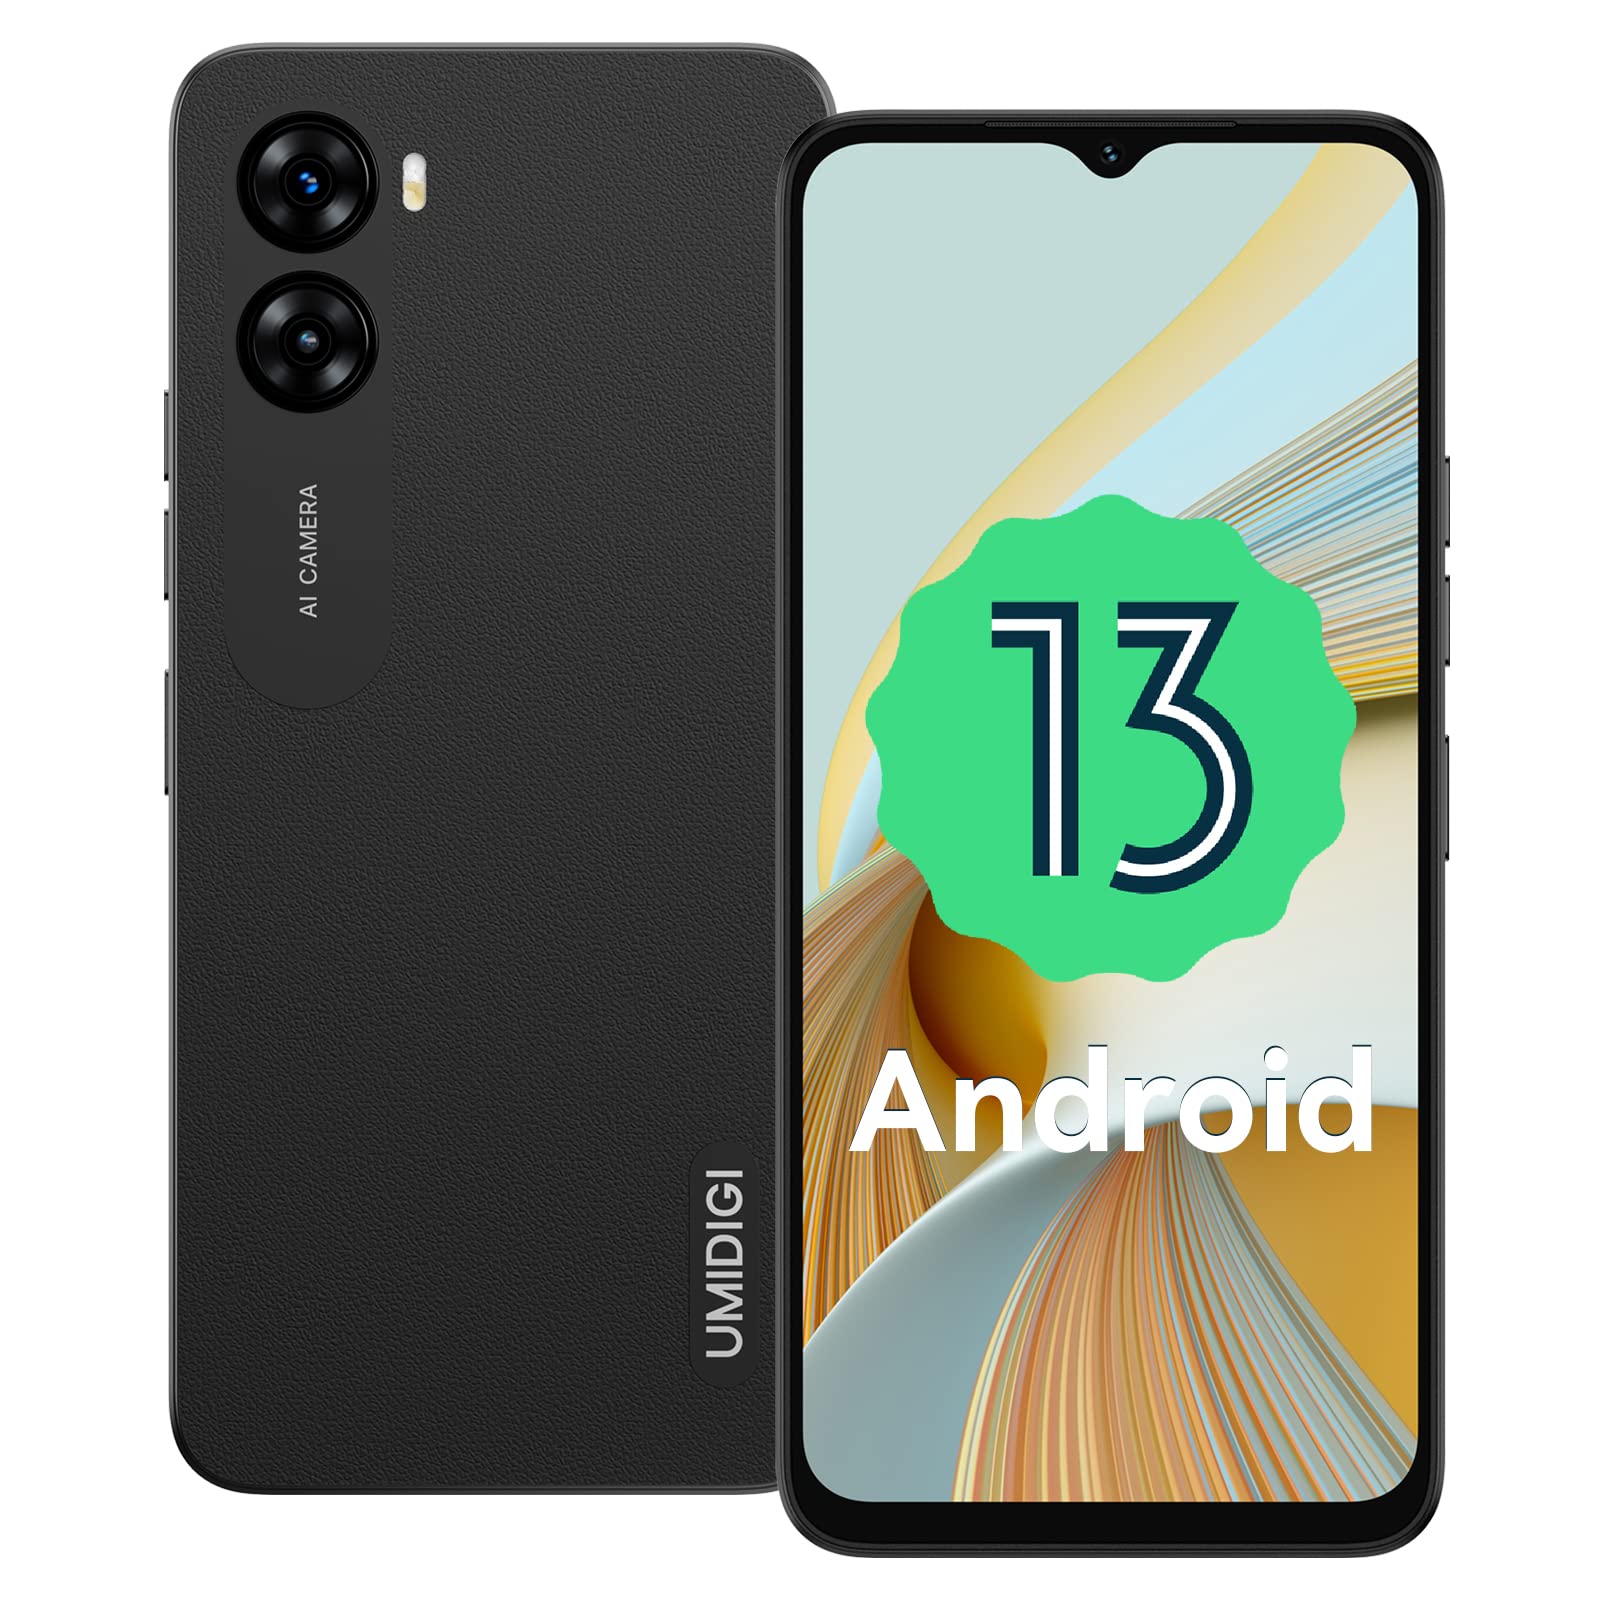 UMIDIGI Unlocked Cell Phone G3 Plus,Android 13 Smartphone,7G(4G+3G)+128G(1TB Expandable), Dual Sim 4G LTE Mobile Phone,Octa Core